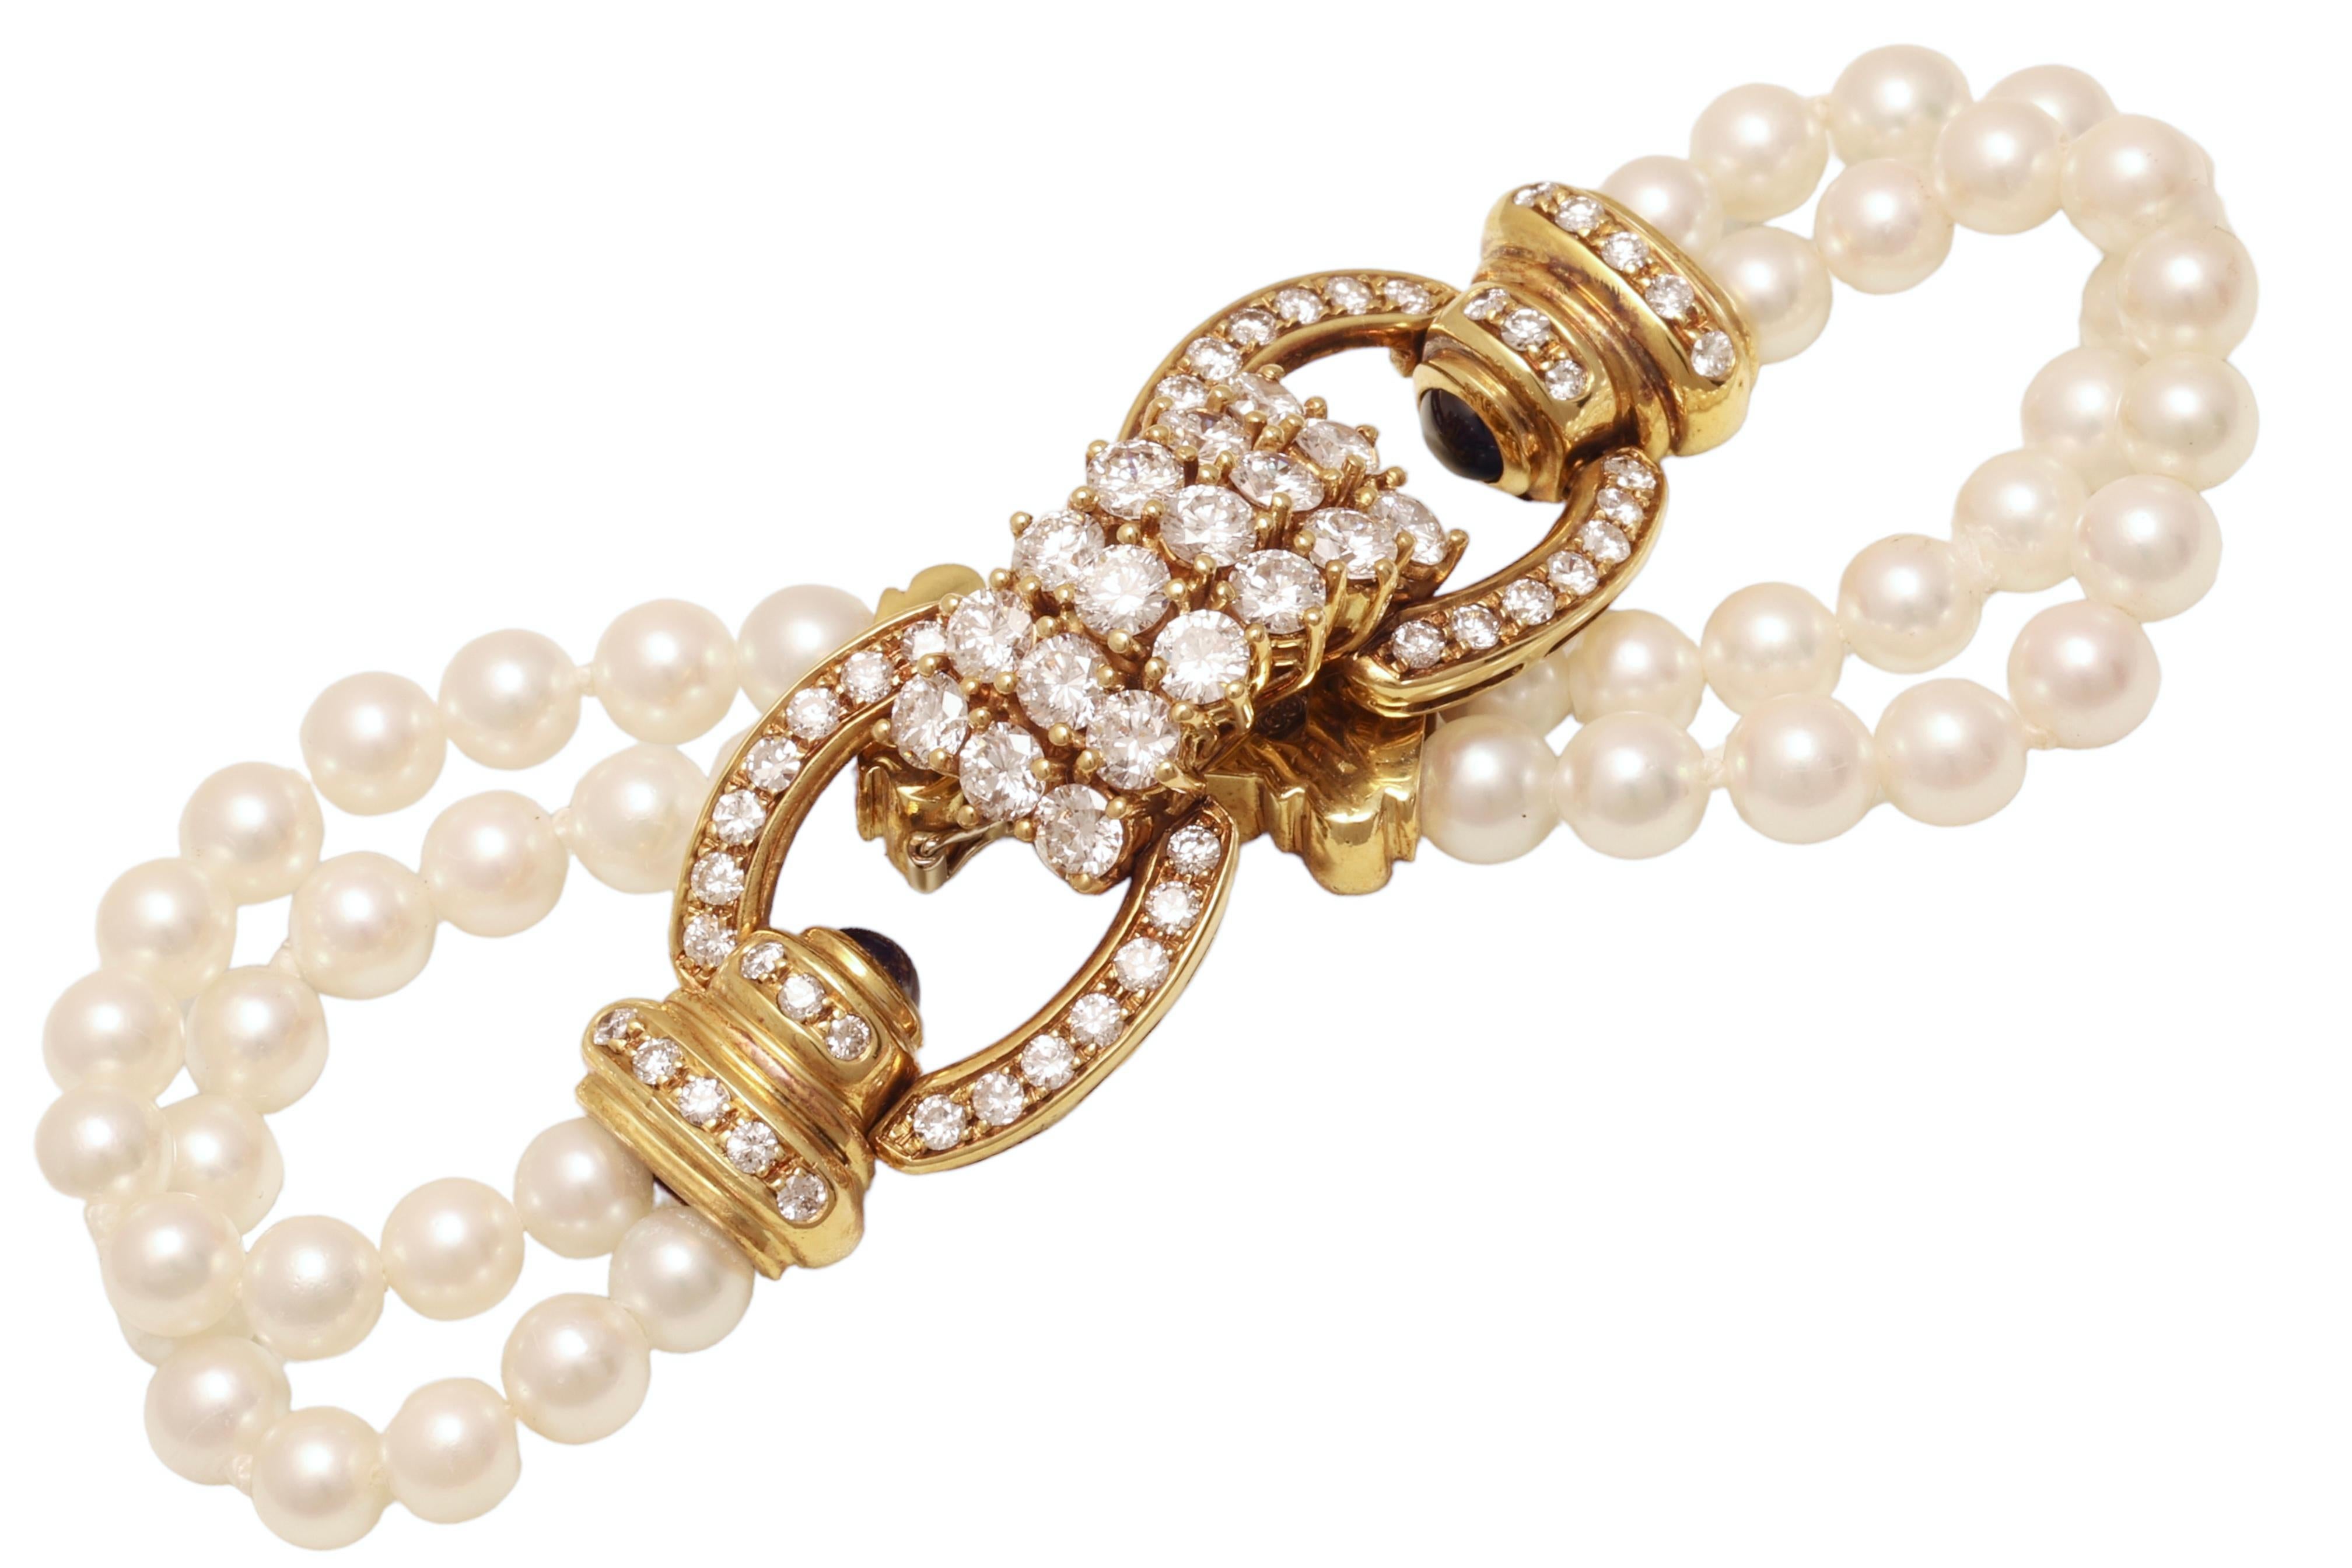 Pearl Bracelet in 18kt Yellow Gold Set With 3.58ct. Diamonds, Pearls & Sapphires For Sale 4